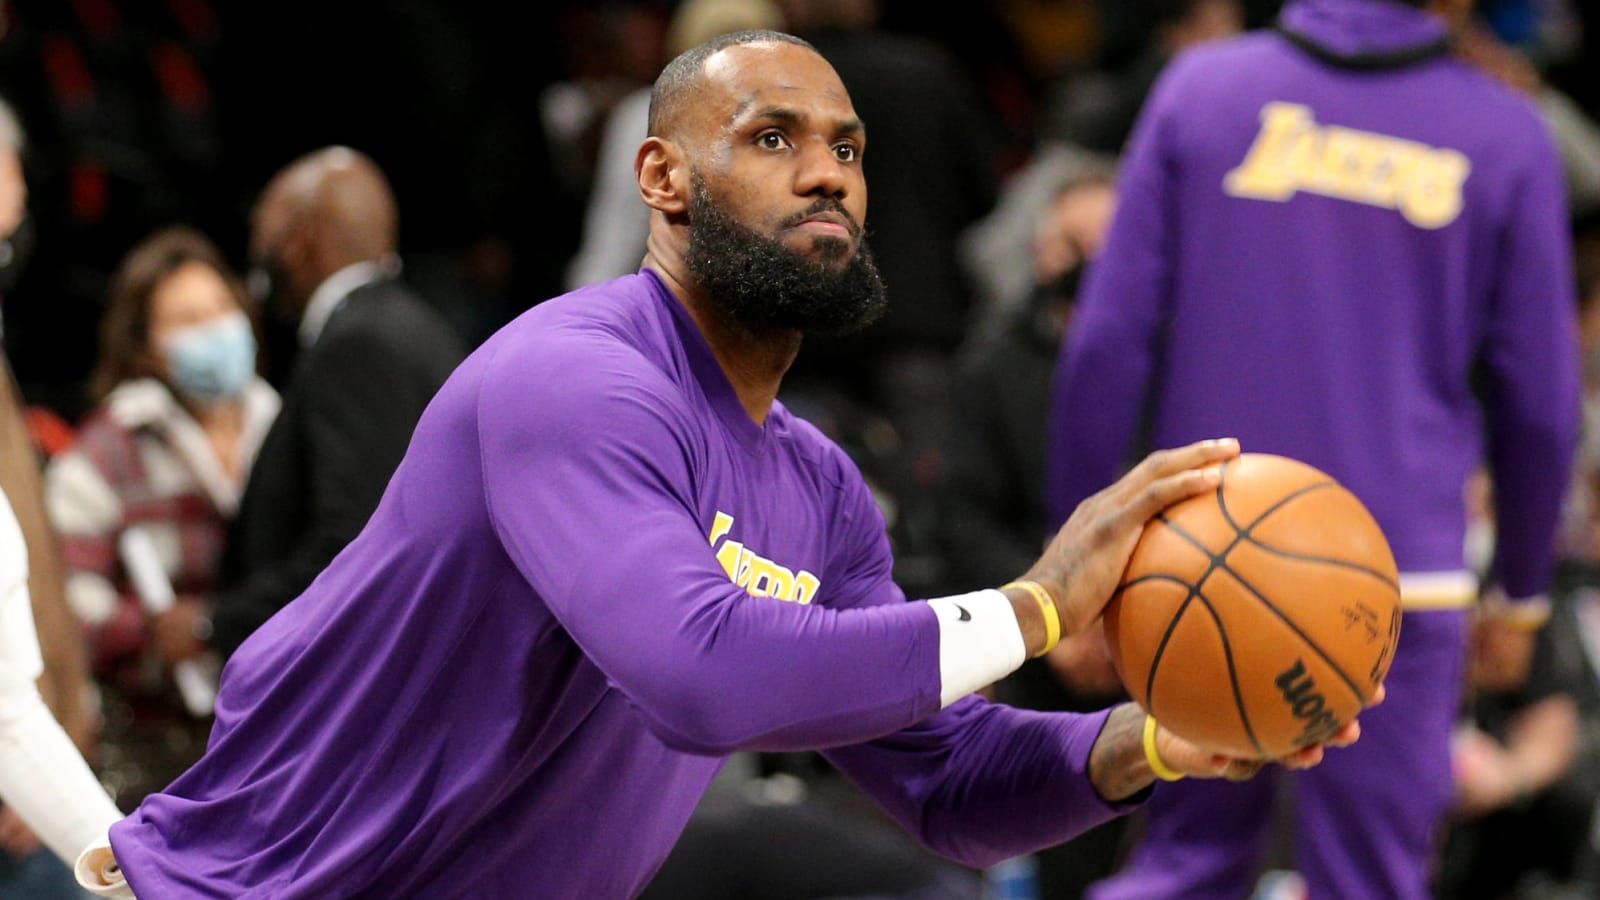 LeBron would leave Lakers if he could play with son Bronny?